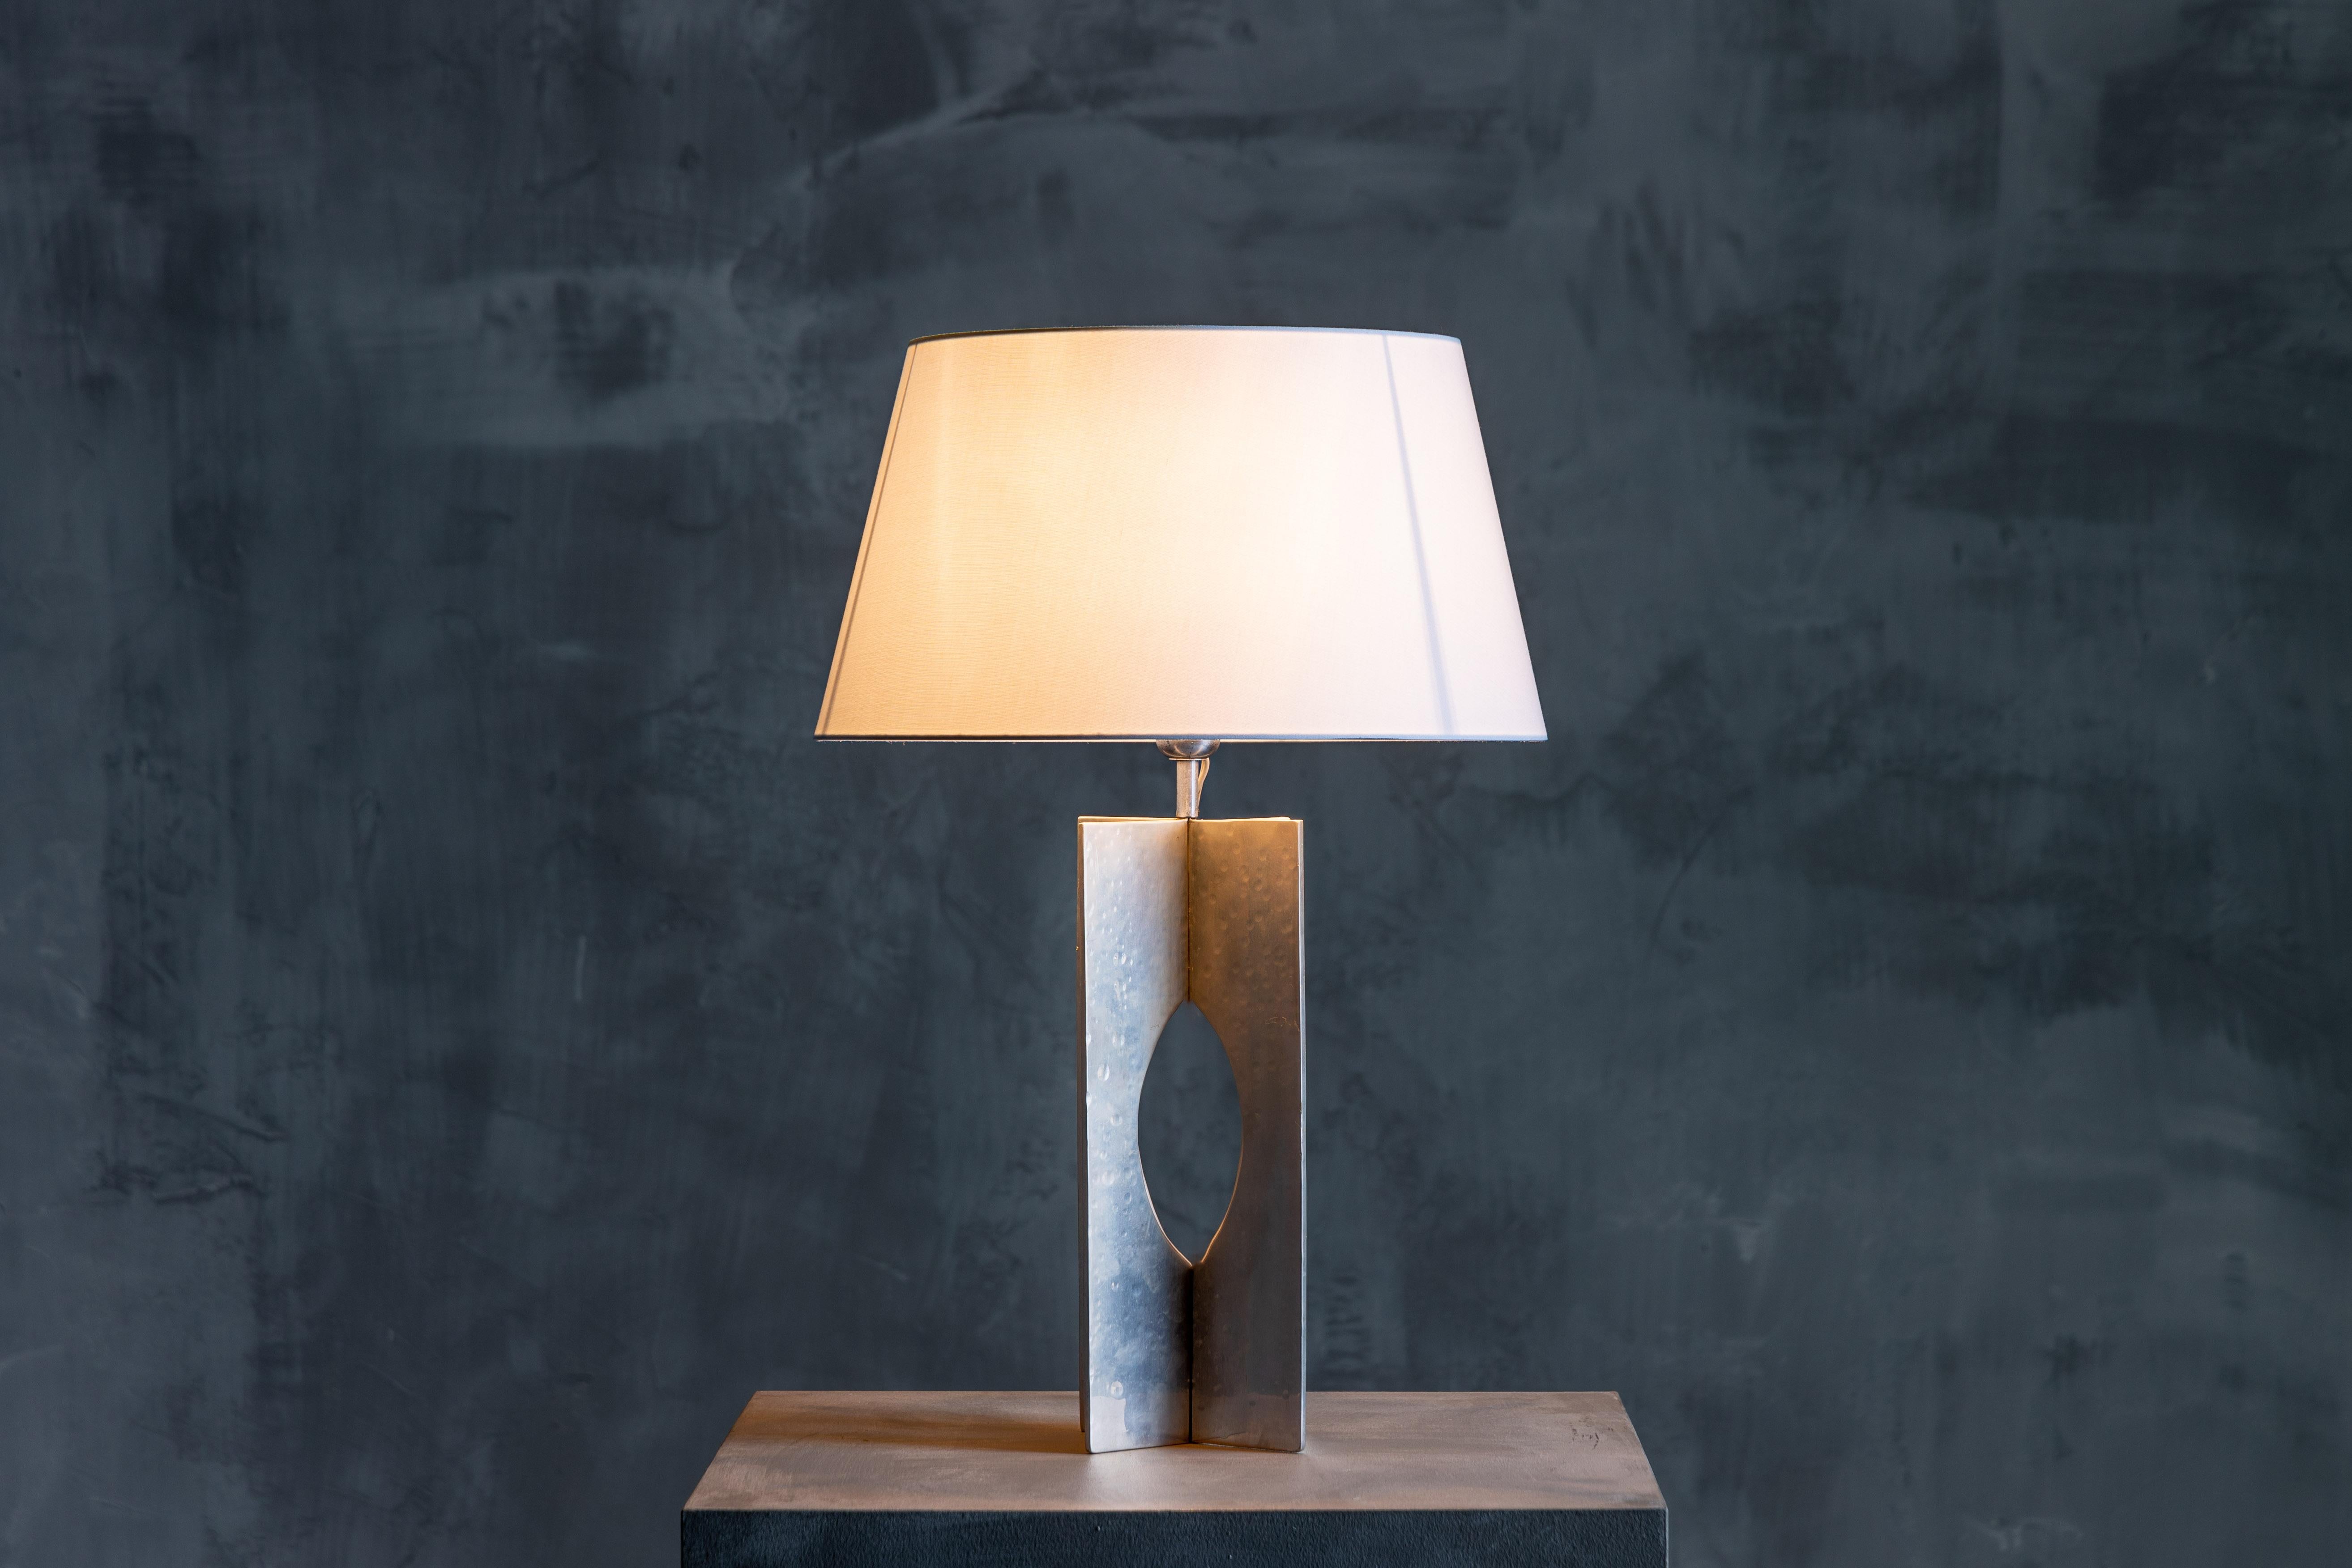 Minimalist table lamp in the style of George Kovacs. Crafted with a sleek chromed steel base, its understated design seamlessly blends into any interior aesthetic. Perfect for adorning console tables, this lamp embraces the beauty of imperfection